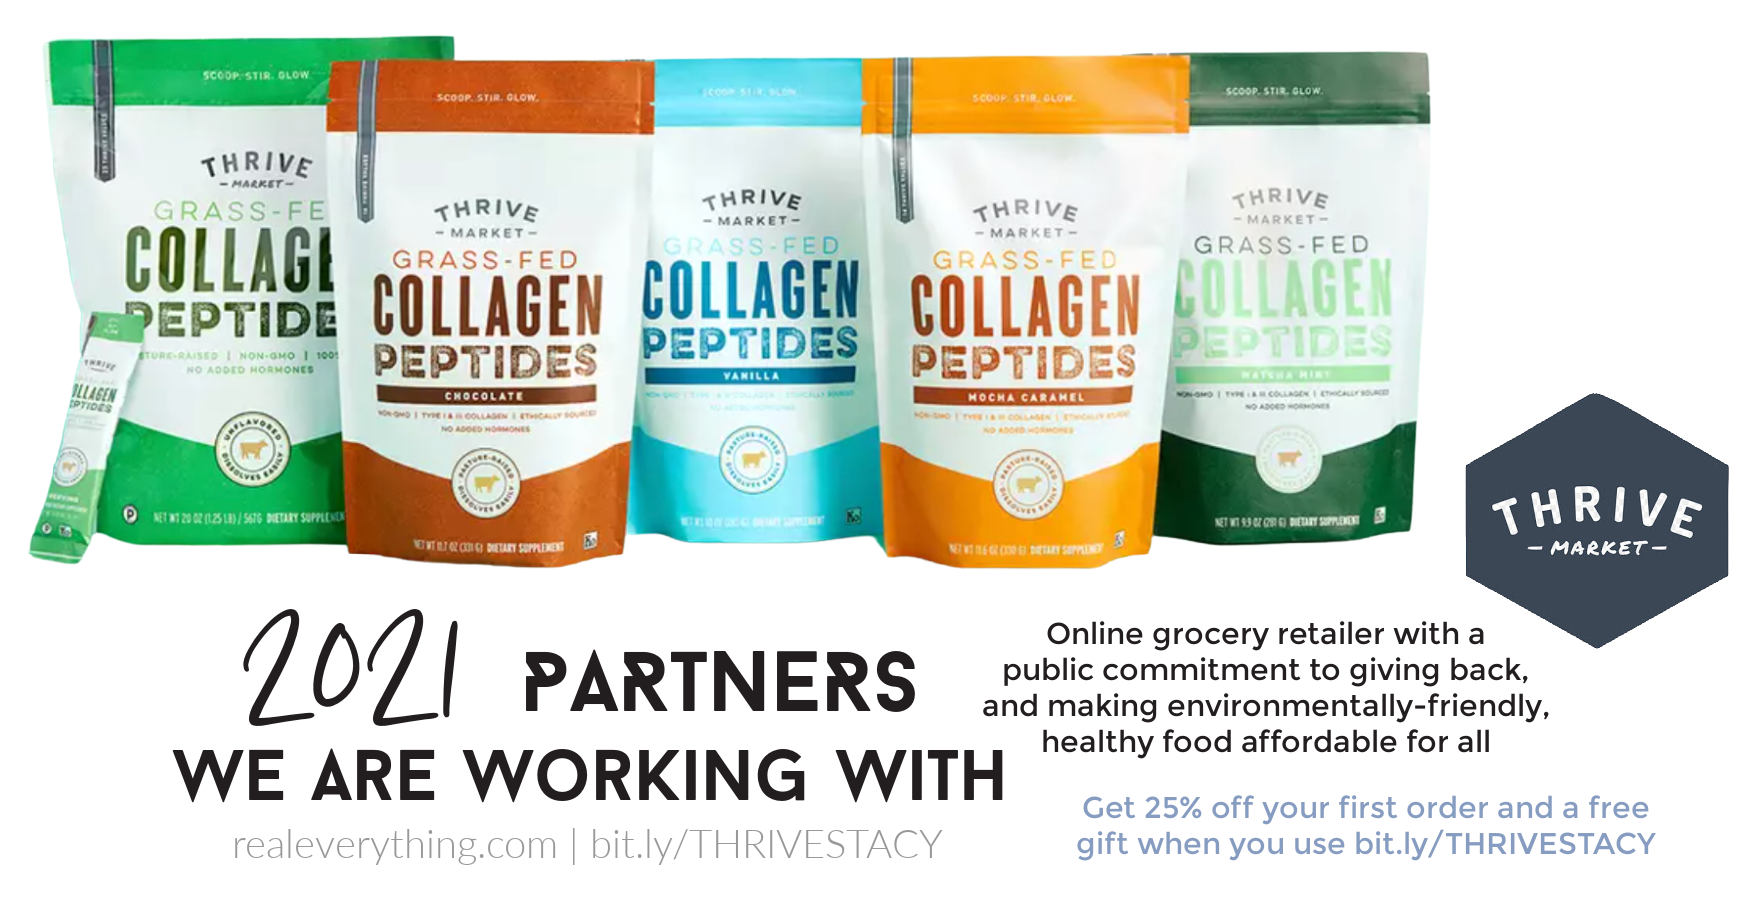 Thrive Market Collagen - Real Everything